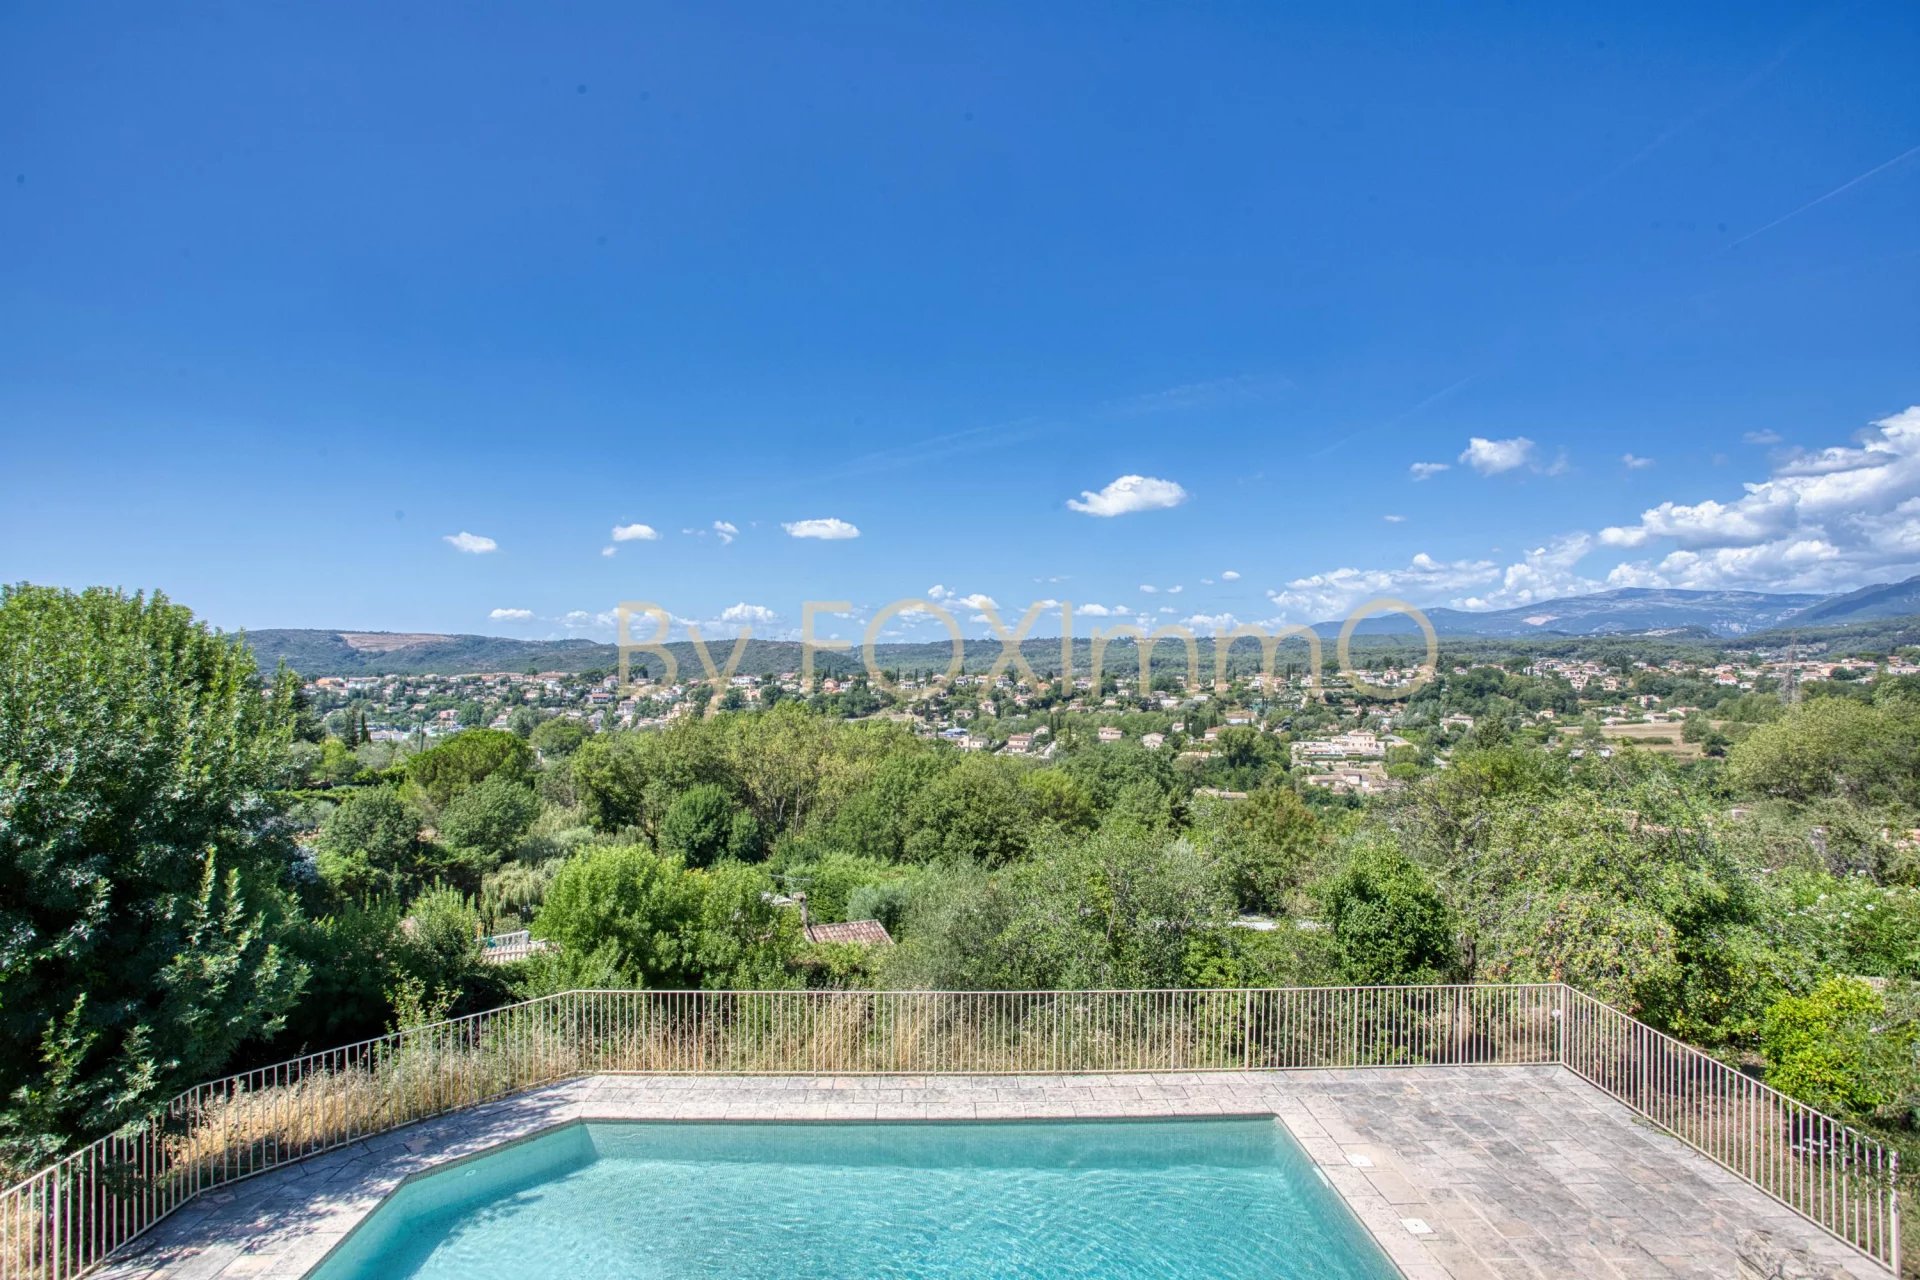 FOR SALE On the Côte d'Azur, Saint Paul de Vence, dominant villa, unobstructed view of the sea and mountains, flat garden, swimming pool